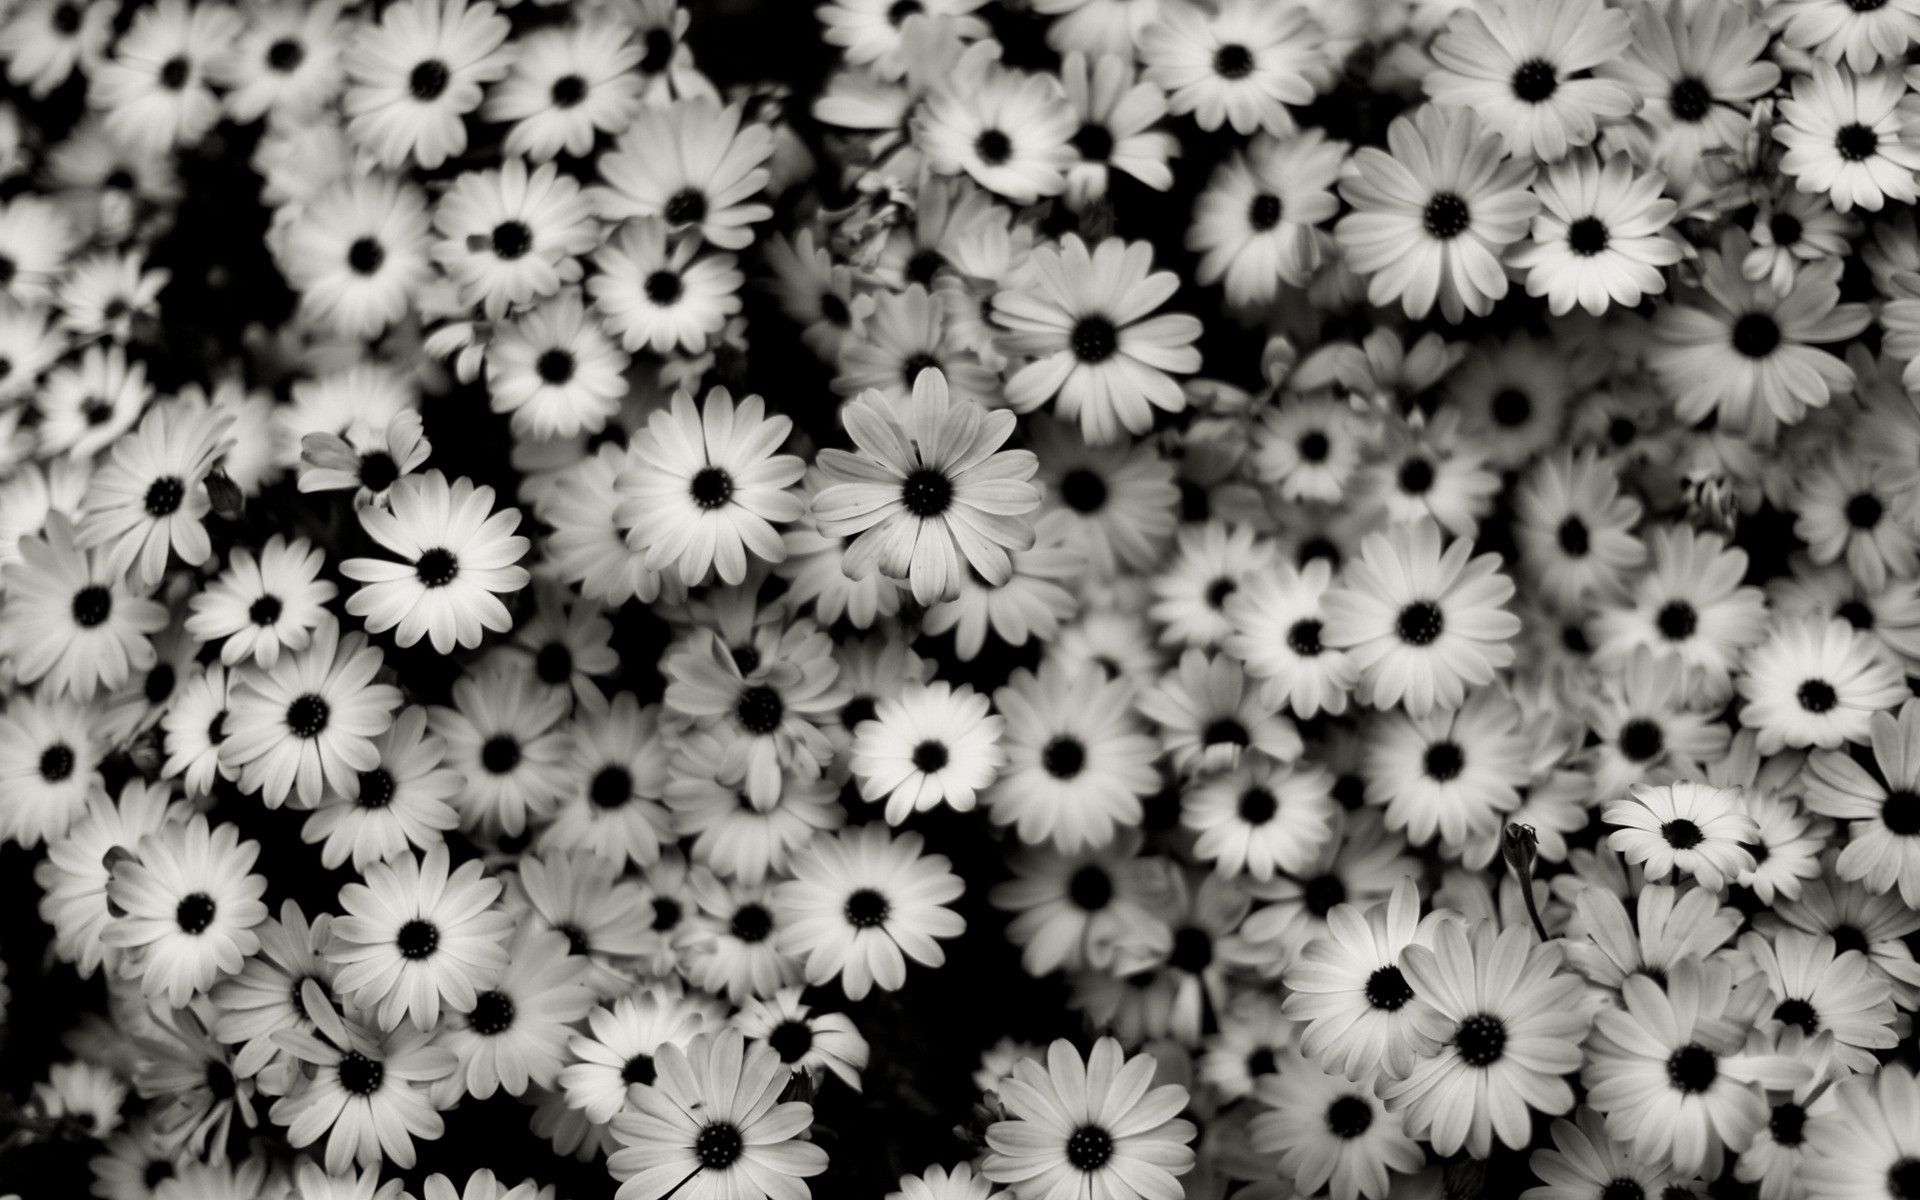 A black and white photo of flowers - Cute white, flower, black and white